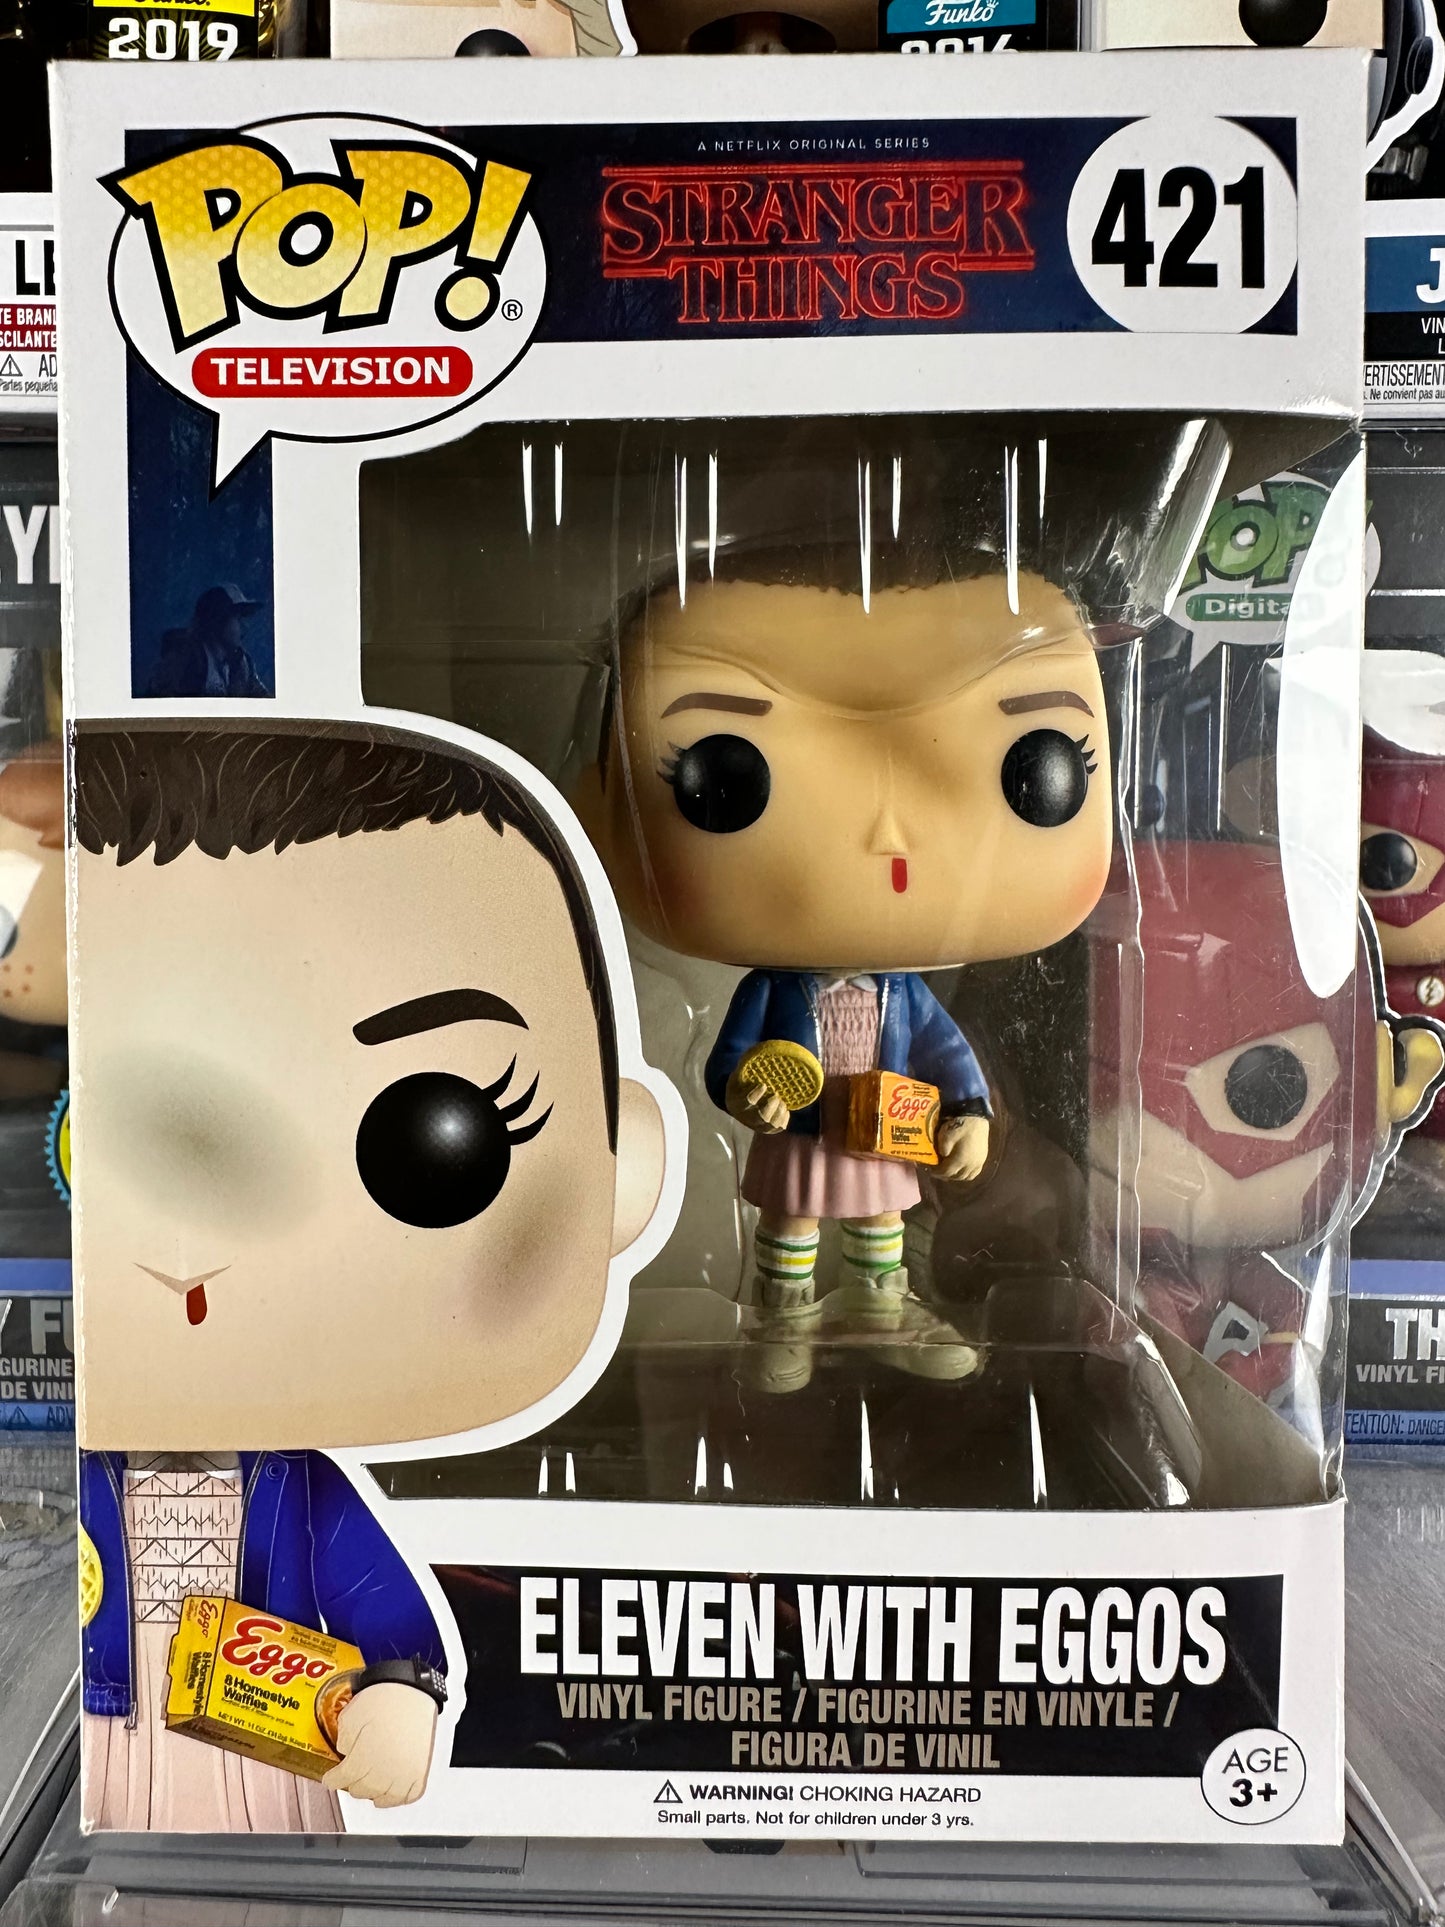 Stranger Things - Eleven With Eggos (421)